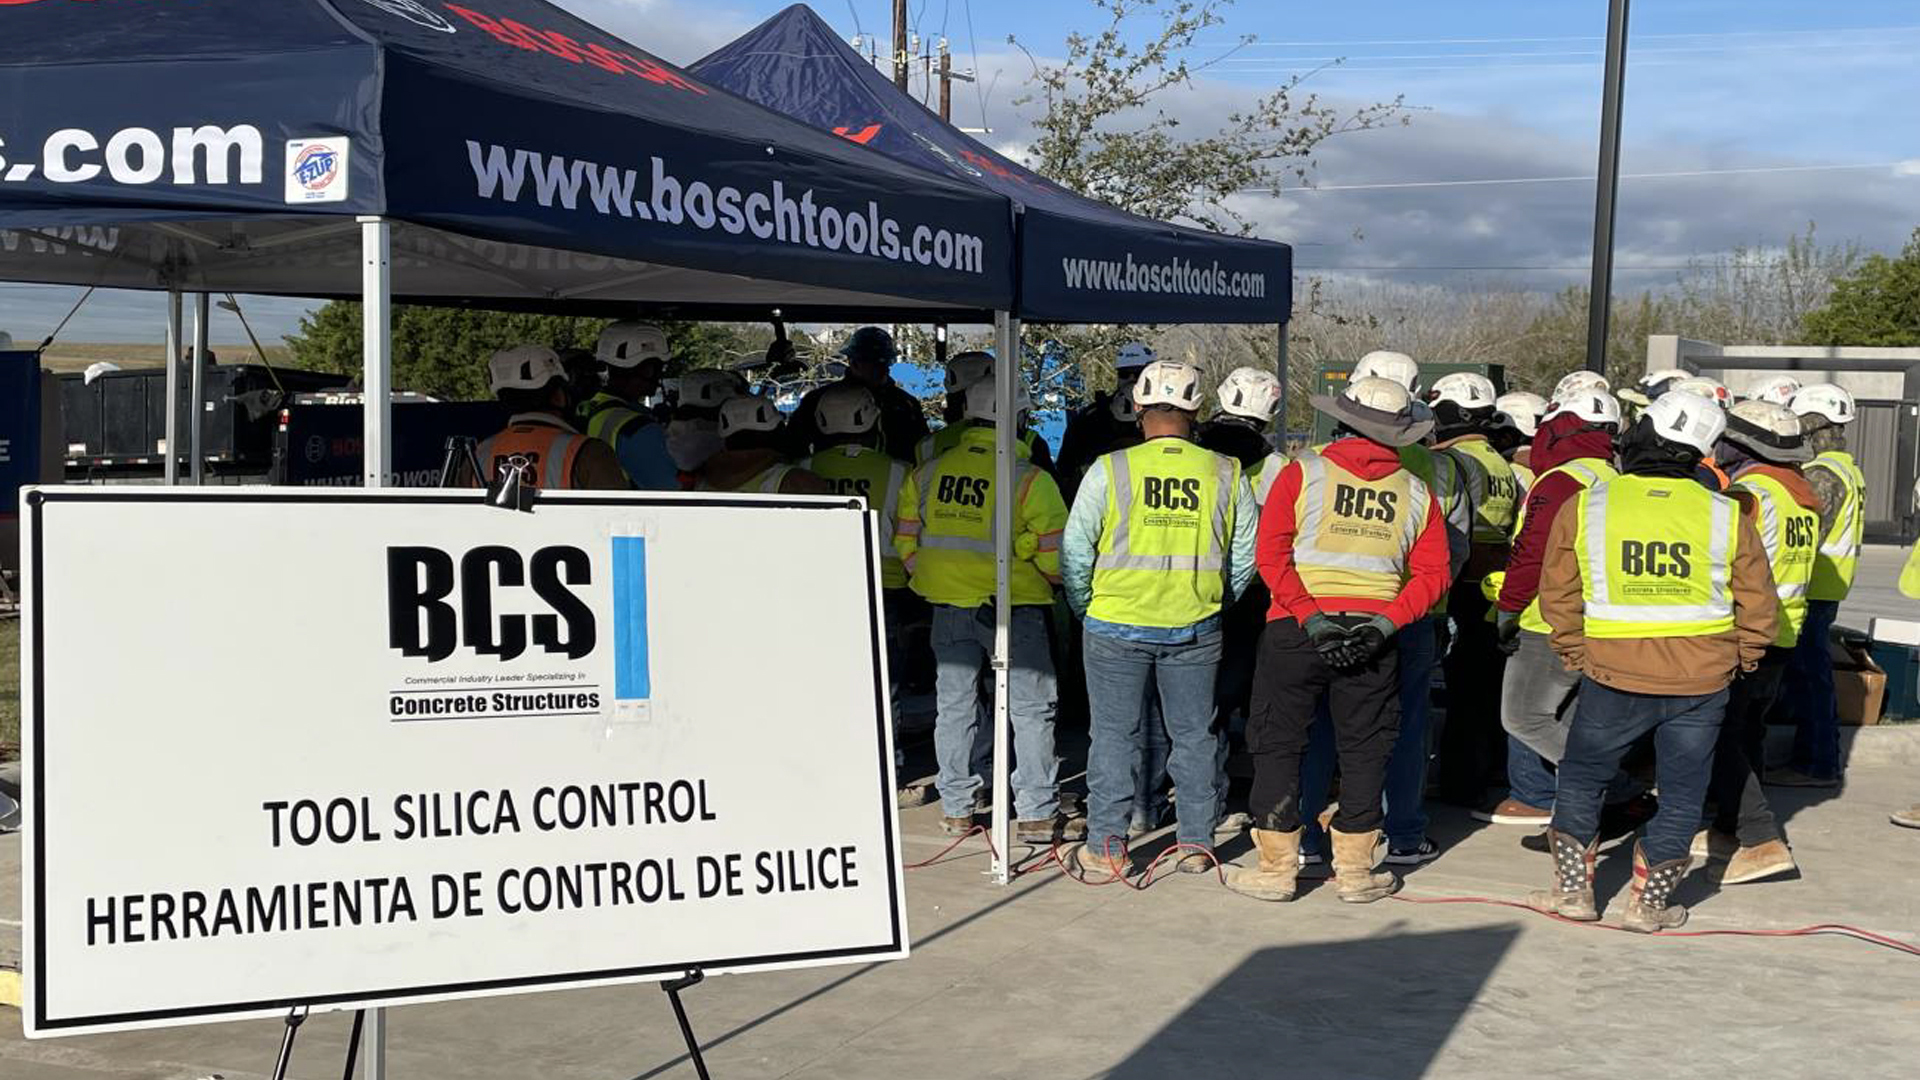 BCS Concrete Structures - Host it's 3rd annual Safety Rodeo - Team huddle.